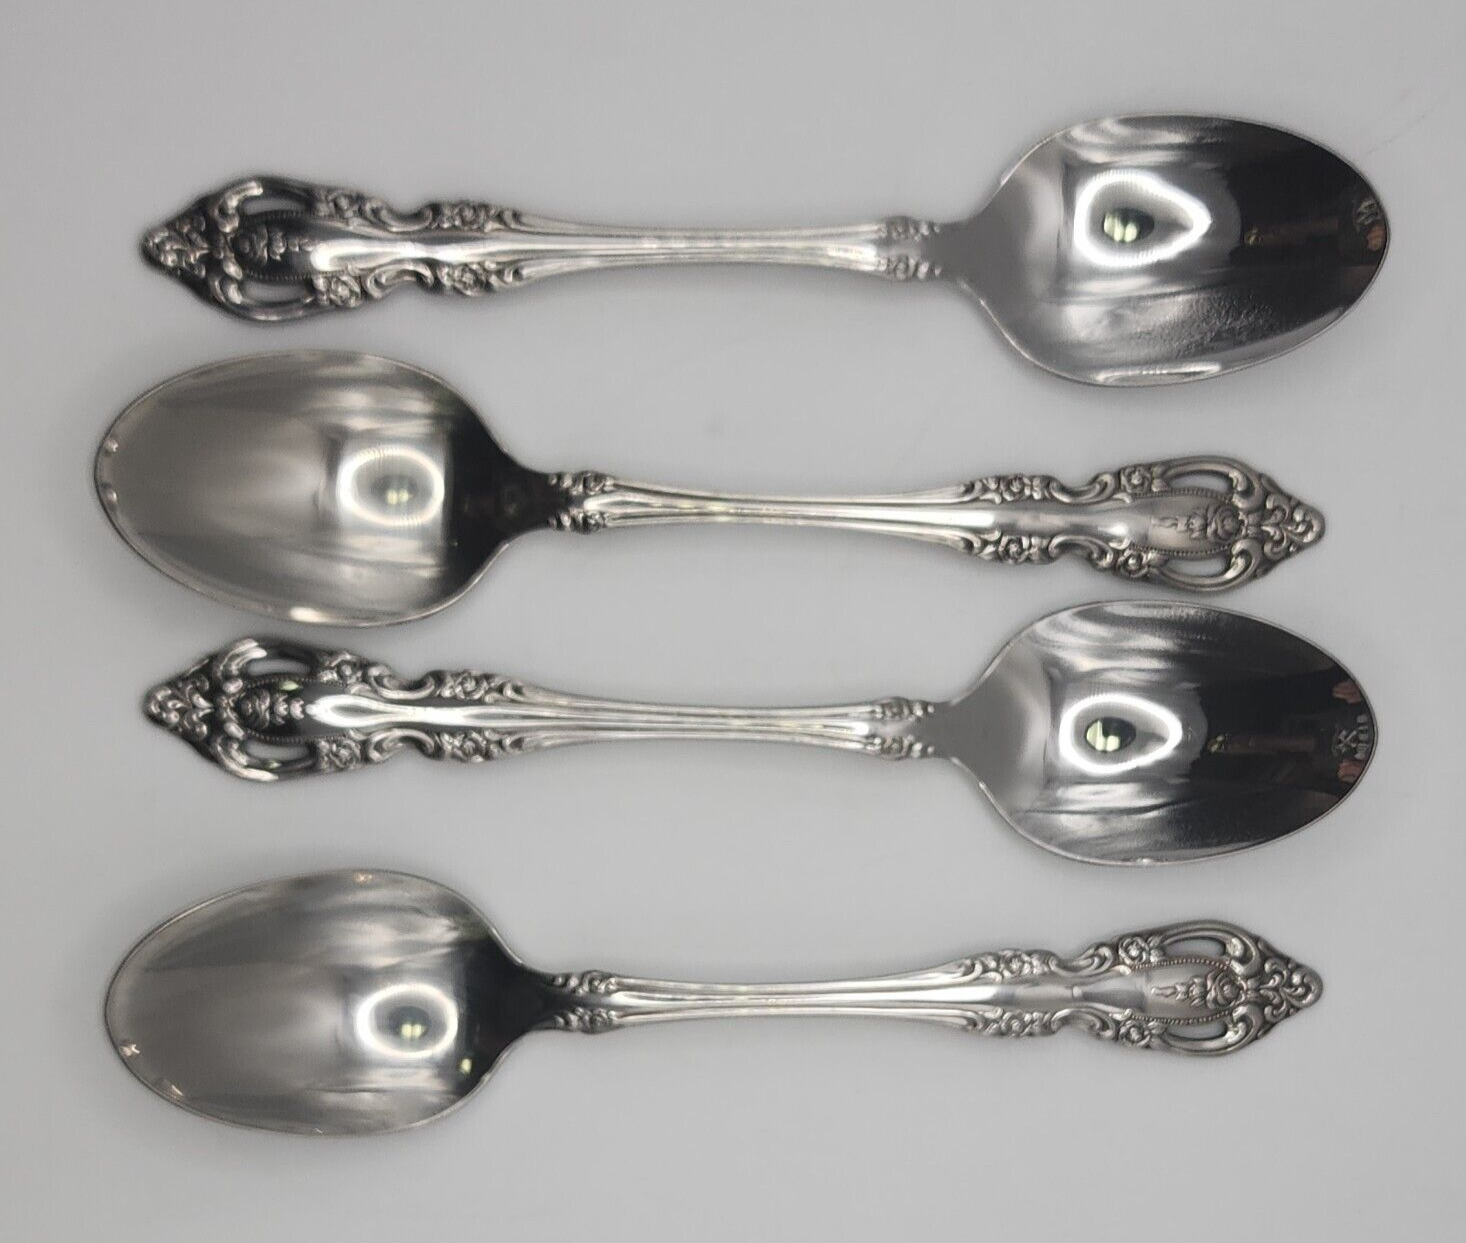 Primary image for Oneida Community Stainless Brahms Oval Soup Spoon 6 7/8" - Set of 4